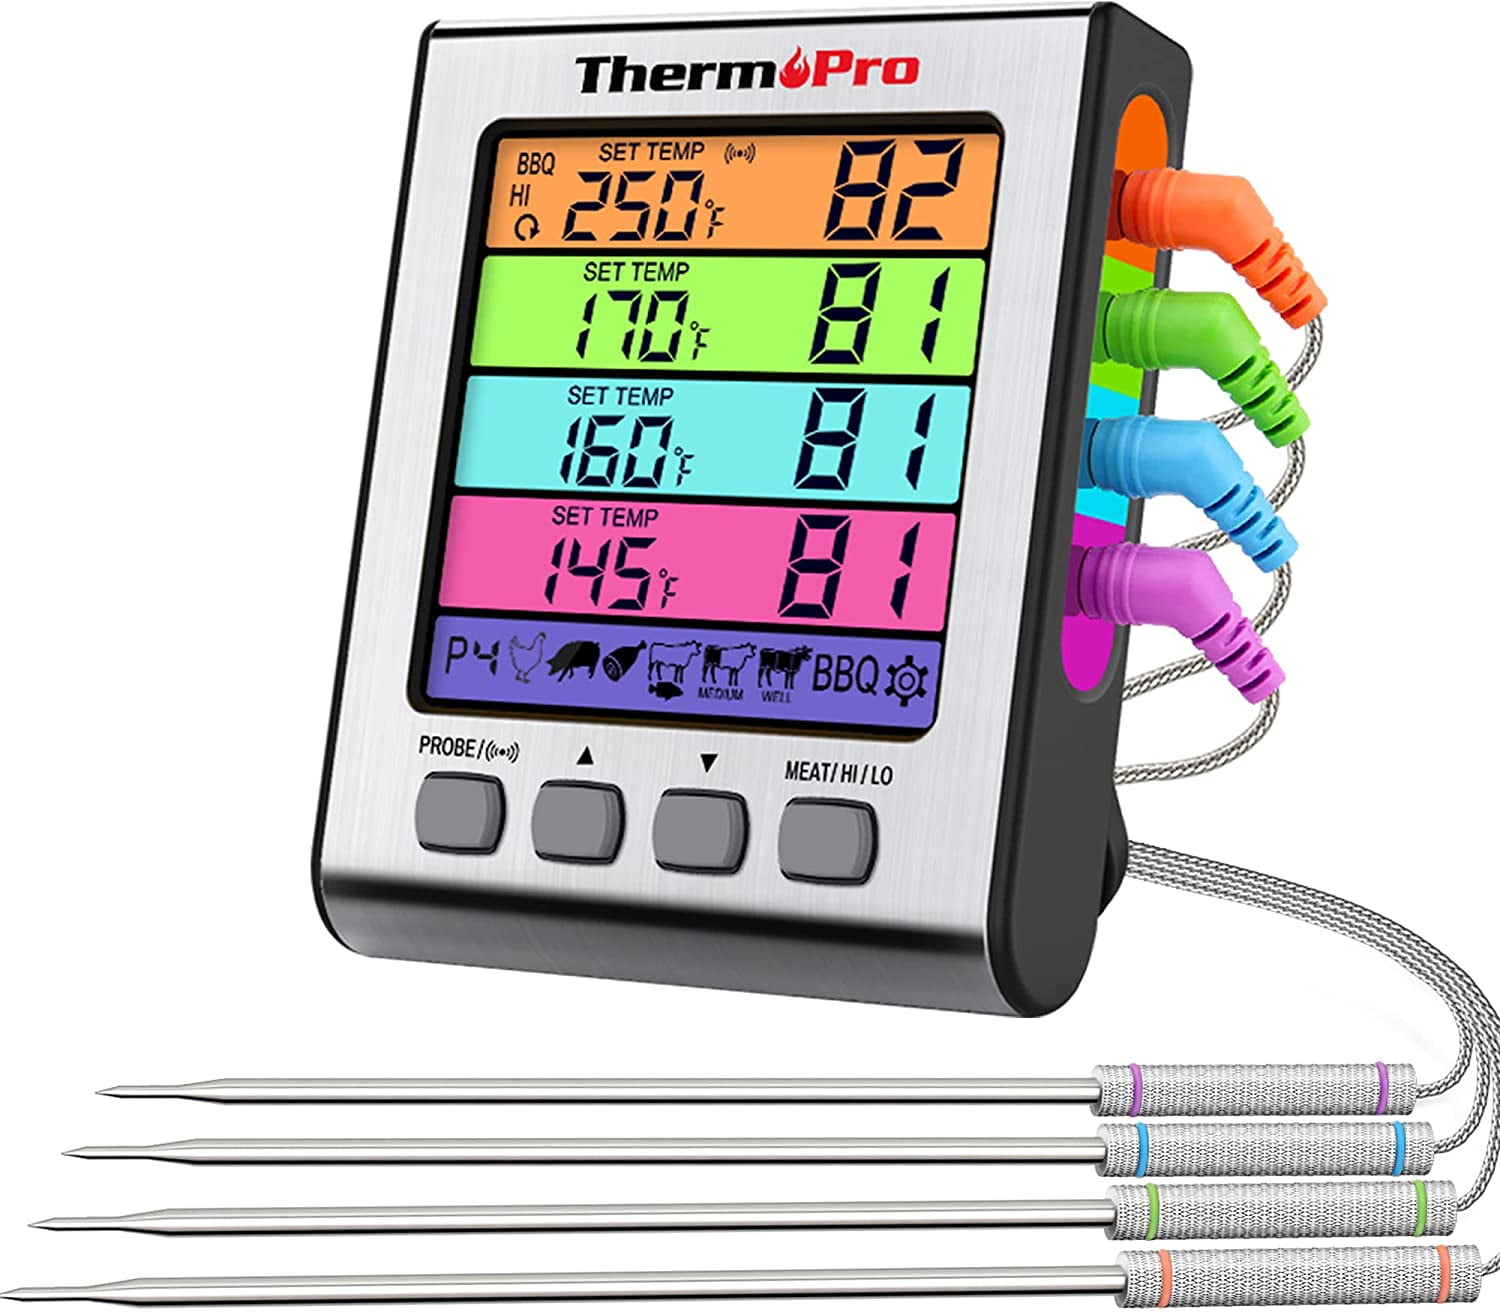 ThermoPro TP930 - The 500 ft. Bluetooth Meat Thermometer Of Your